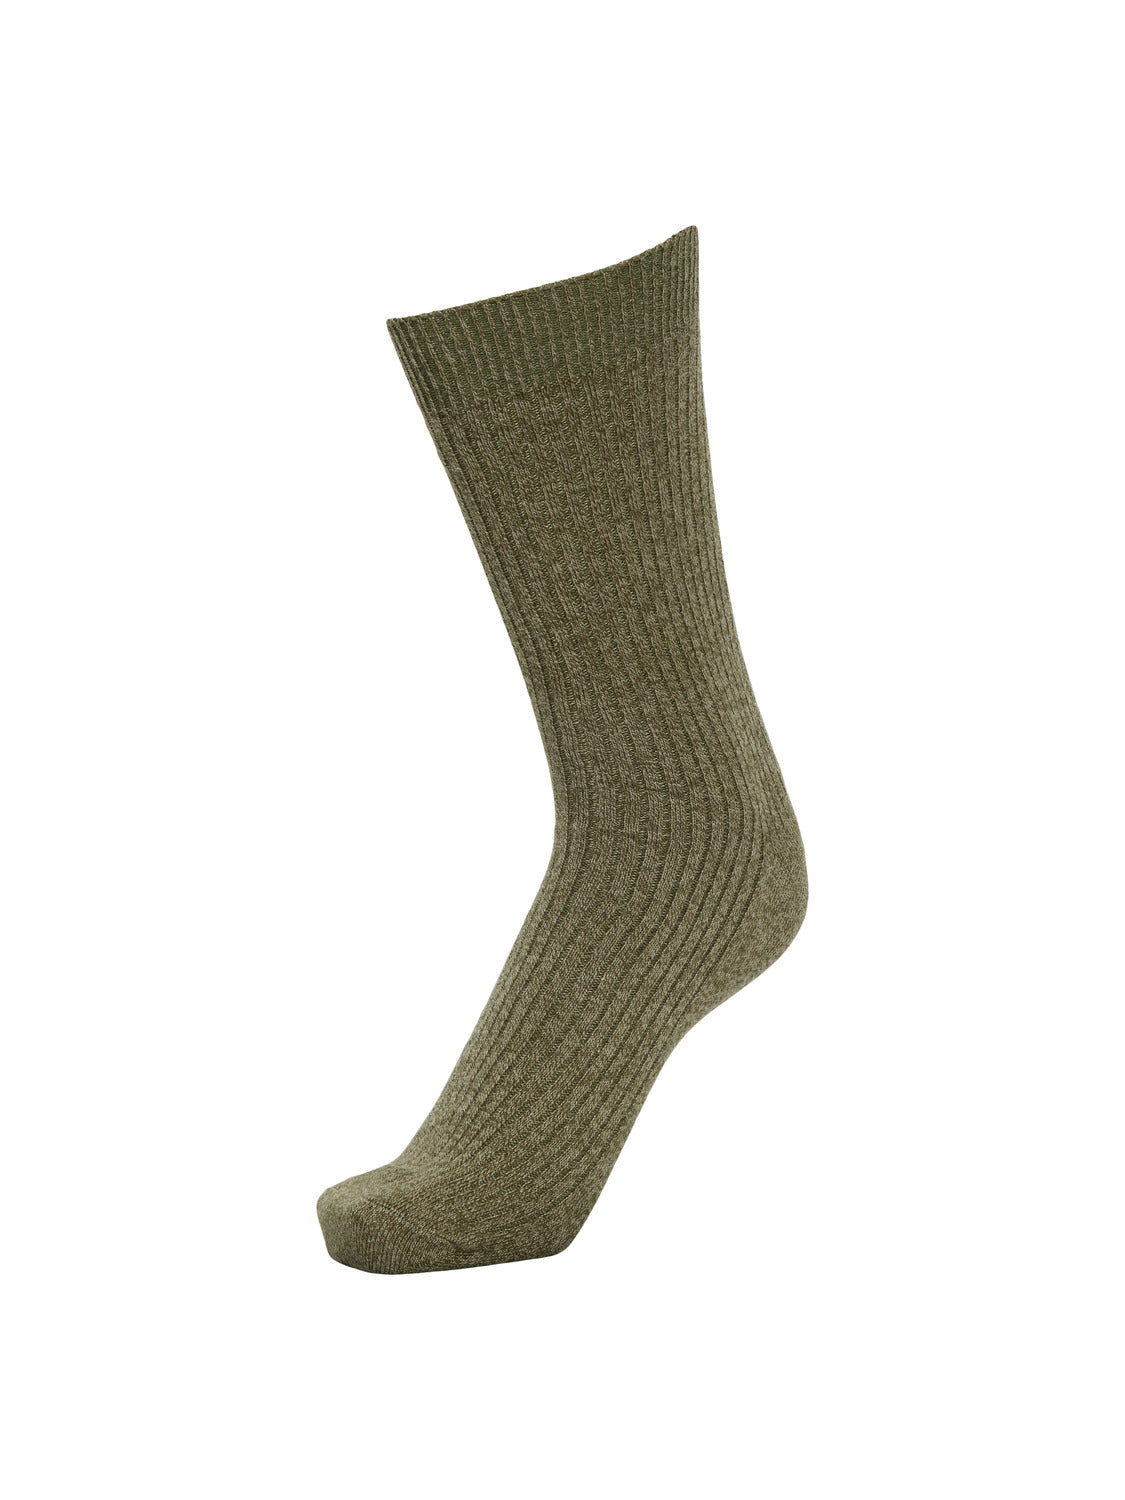 SLHTERRY Socks - Ivy Green